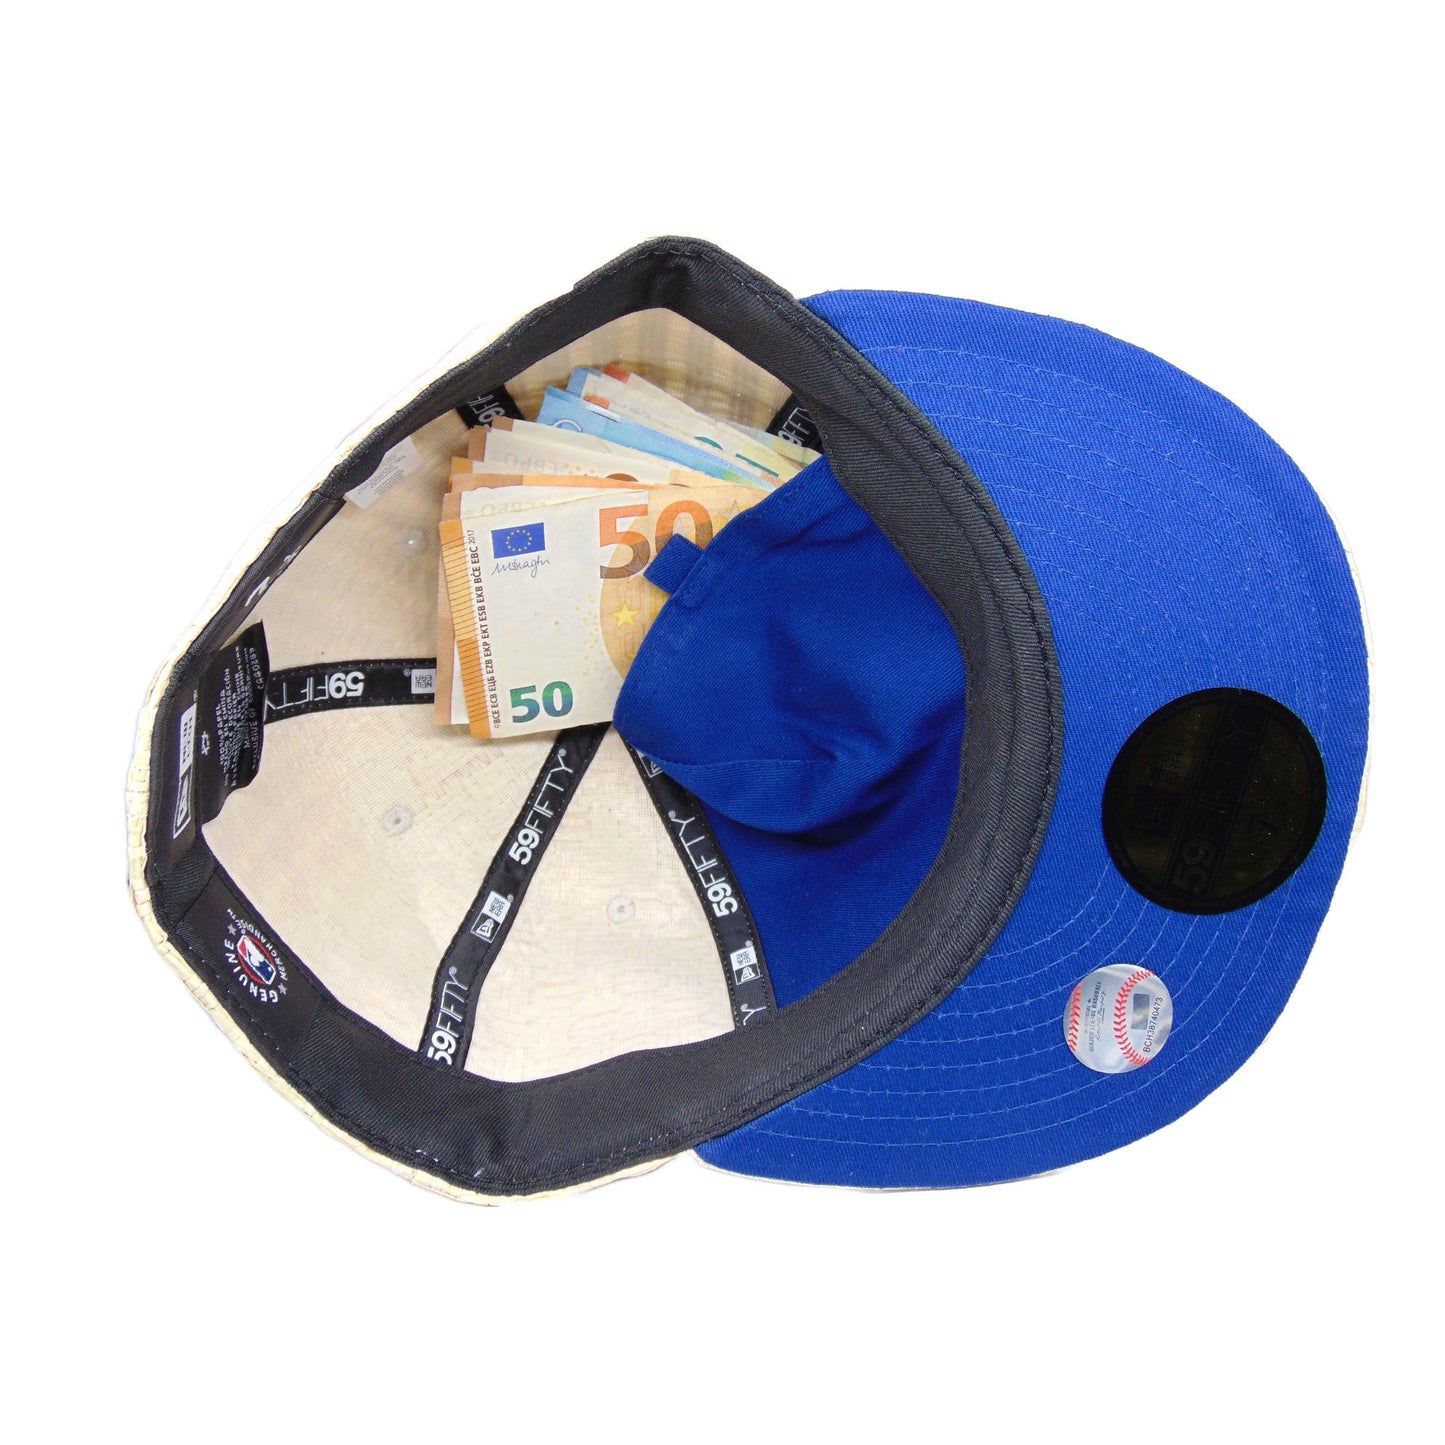 Los Angeles Dodgers Exclusive New Era 59FIFTY Cap Straw